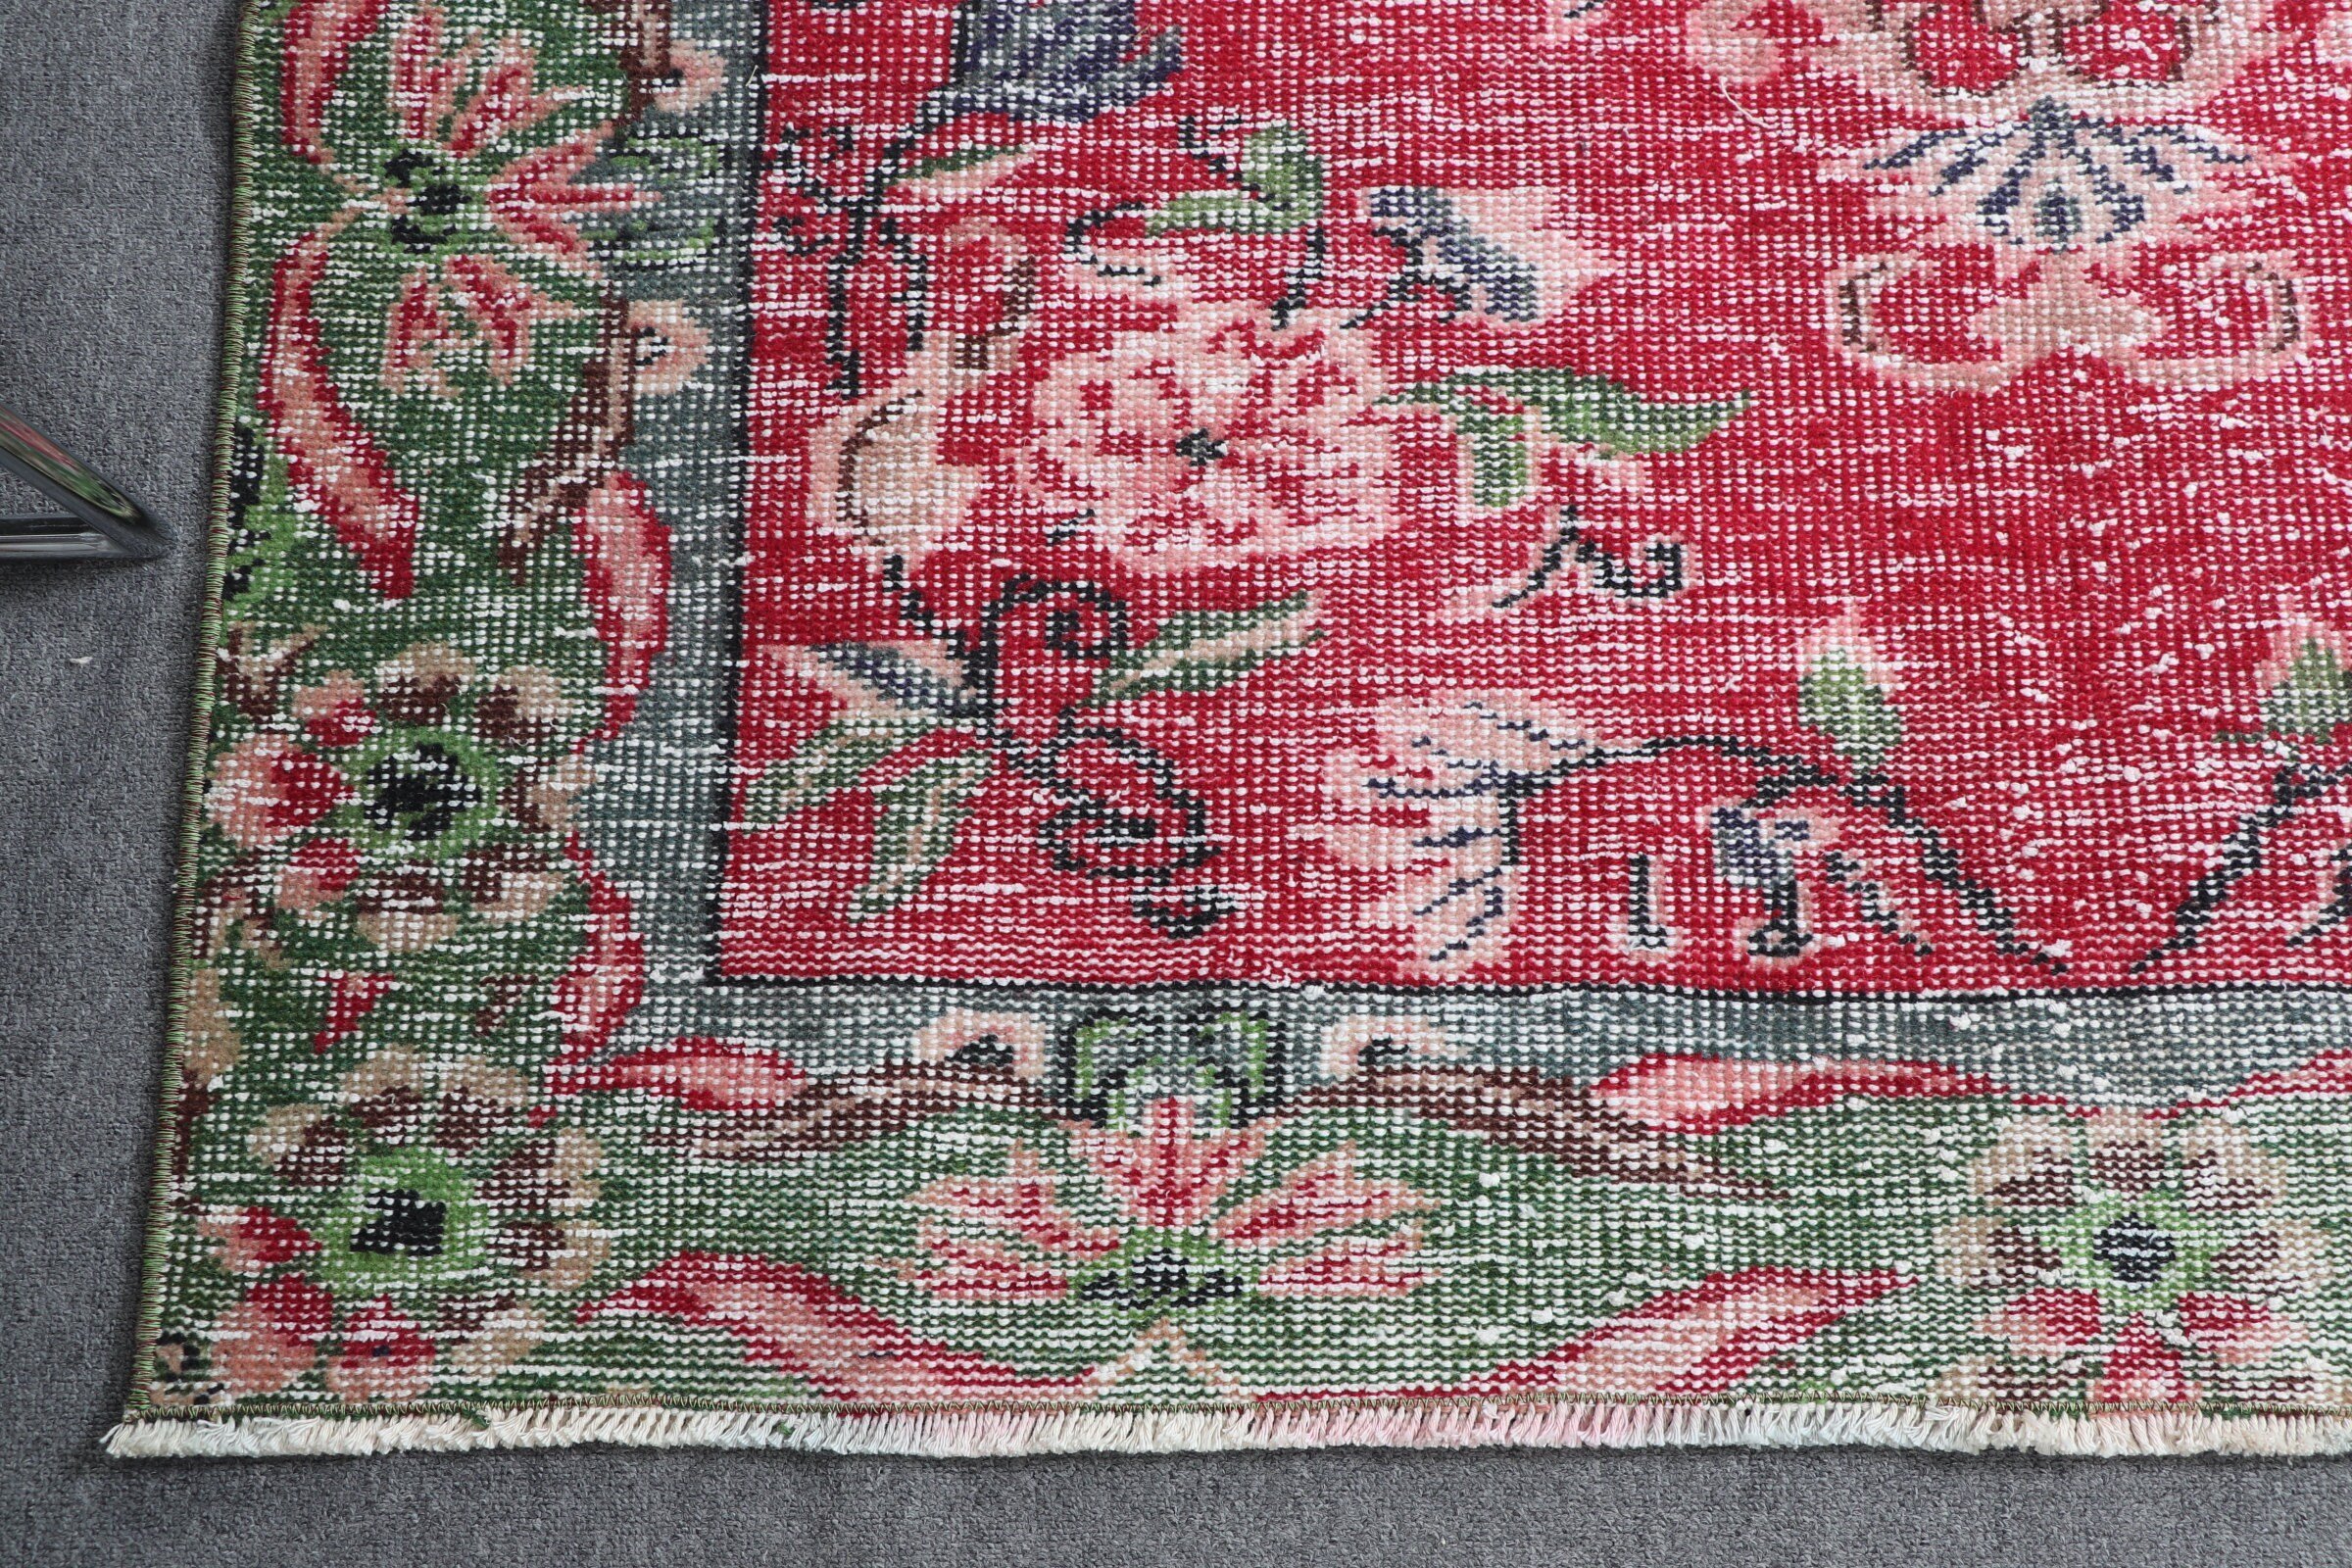 Living Room Rug, Vintage Rugs, Bedroom Rug, Pink Cool Rugs, 4.9x8.2 ft Large Rug, Turkish Rugs, Home Decor Rugs, Rugs for Dining Room